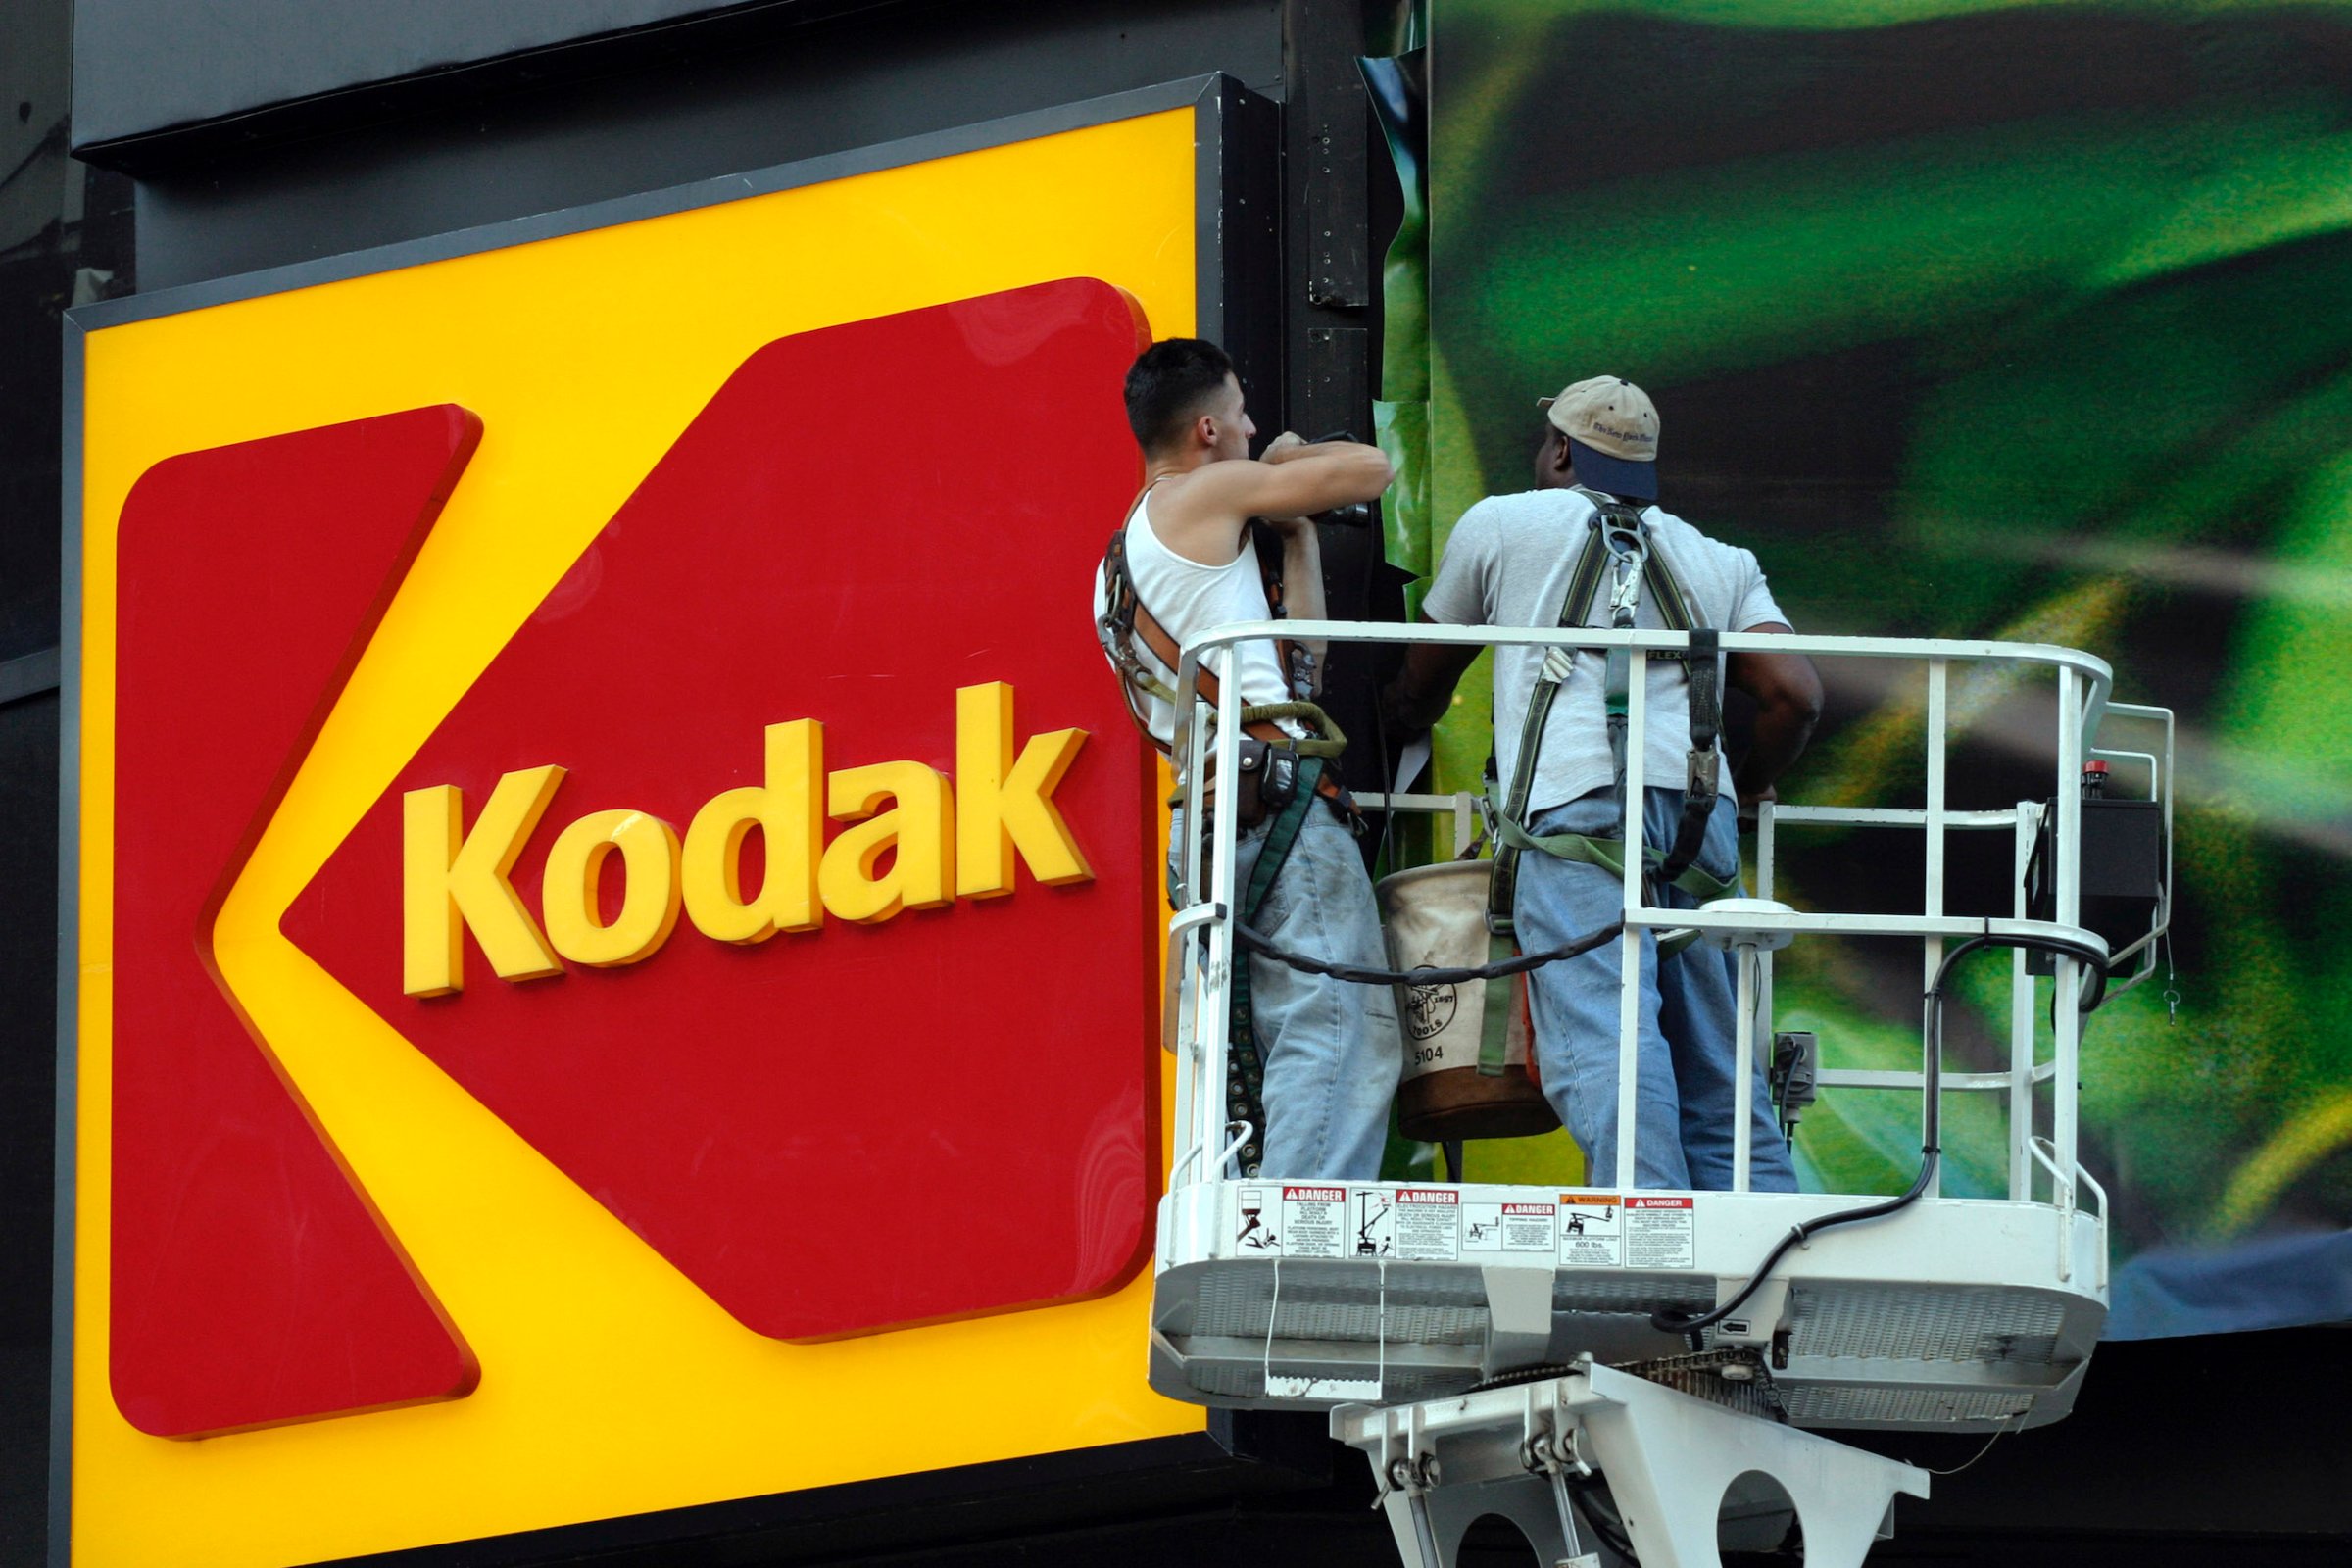 Workers stand near the KODAK billboard at Times Square, New York City.